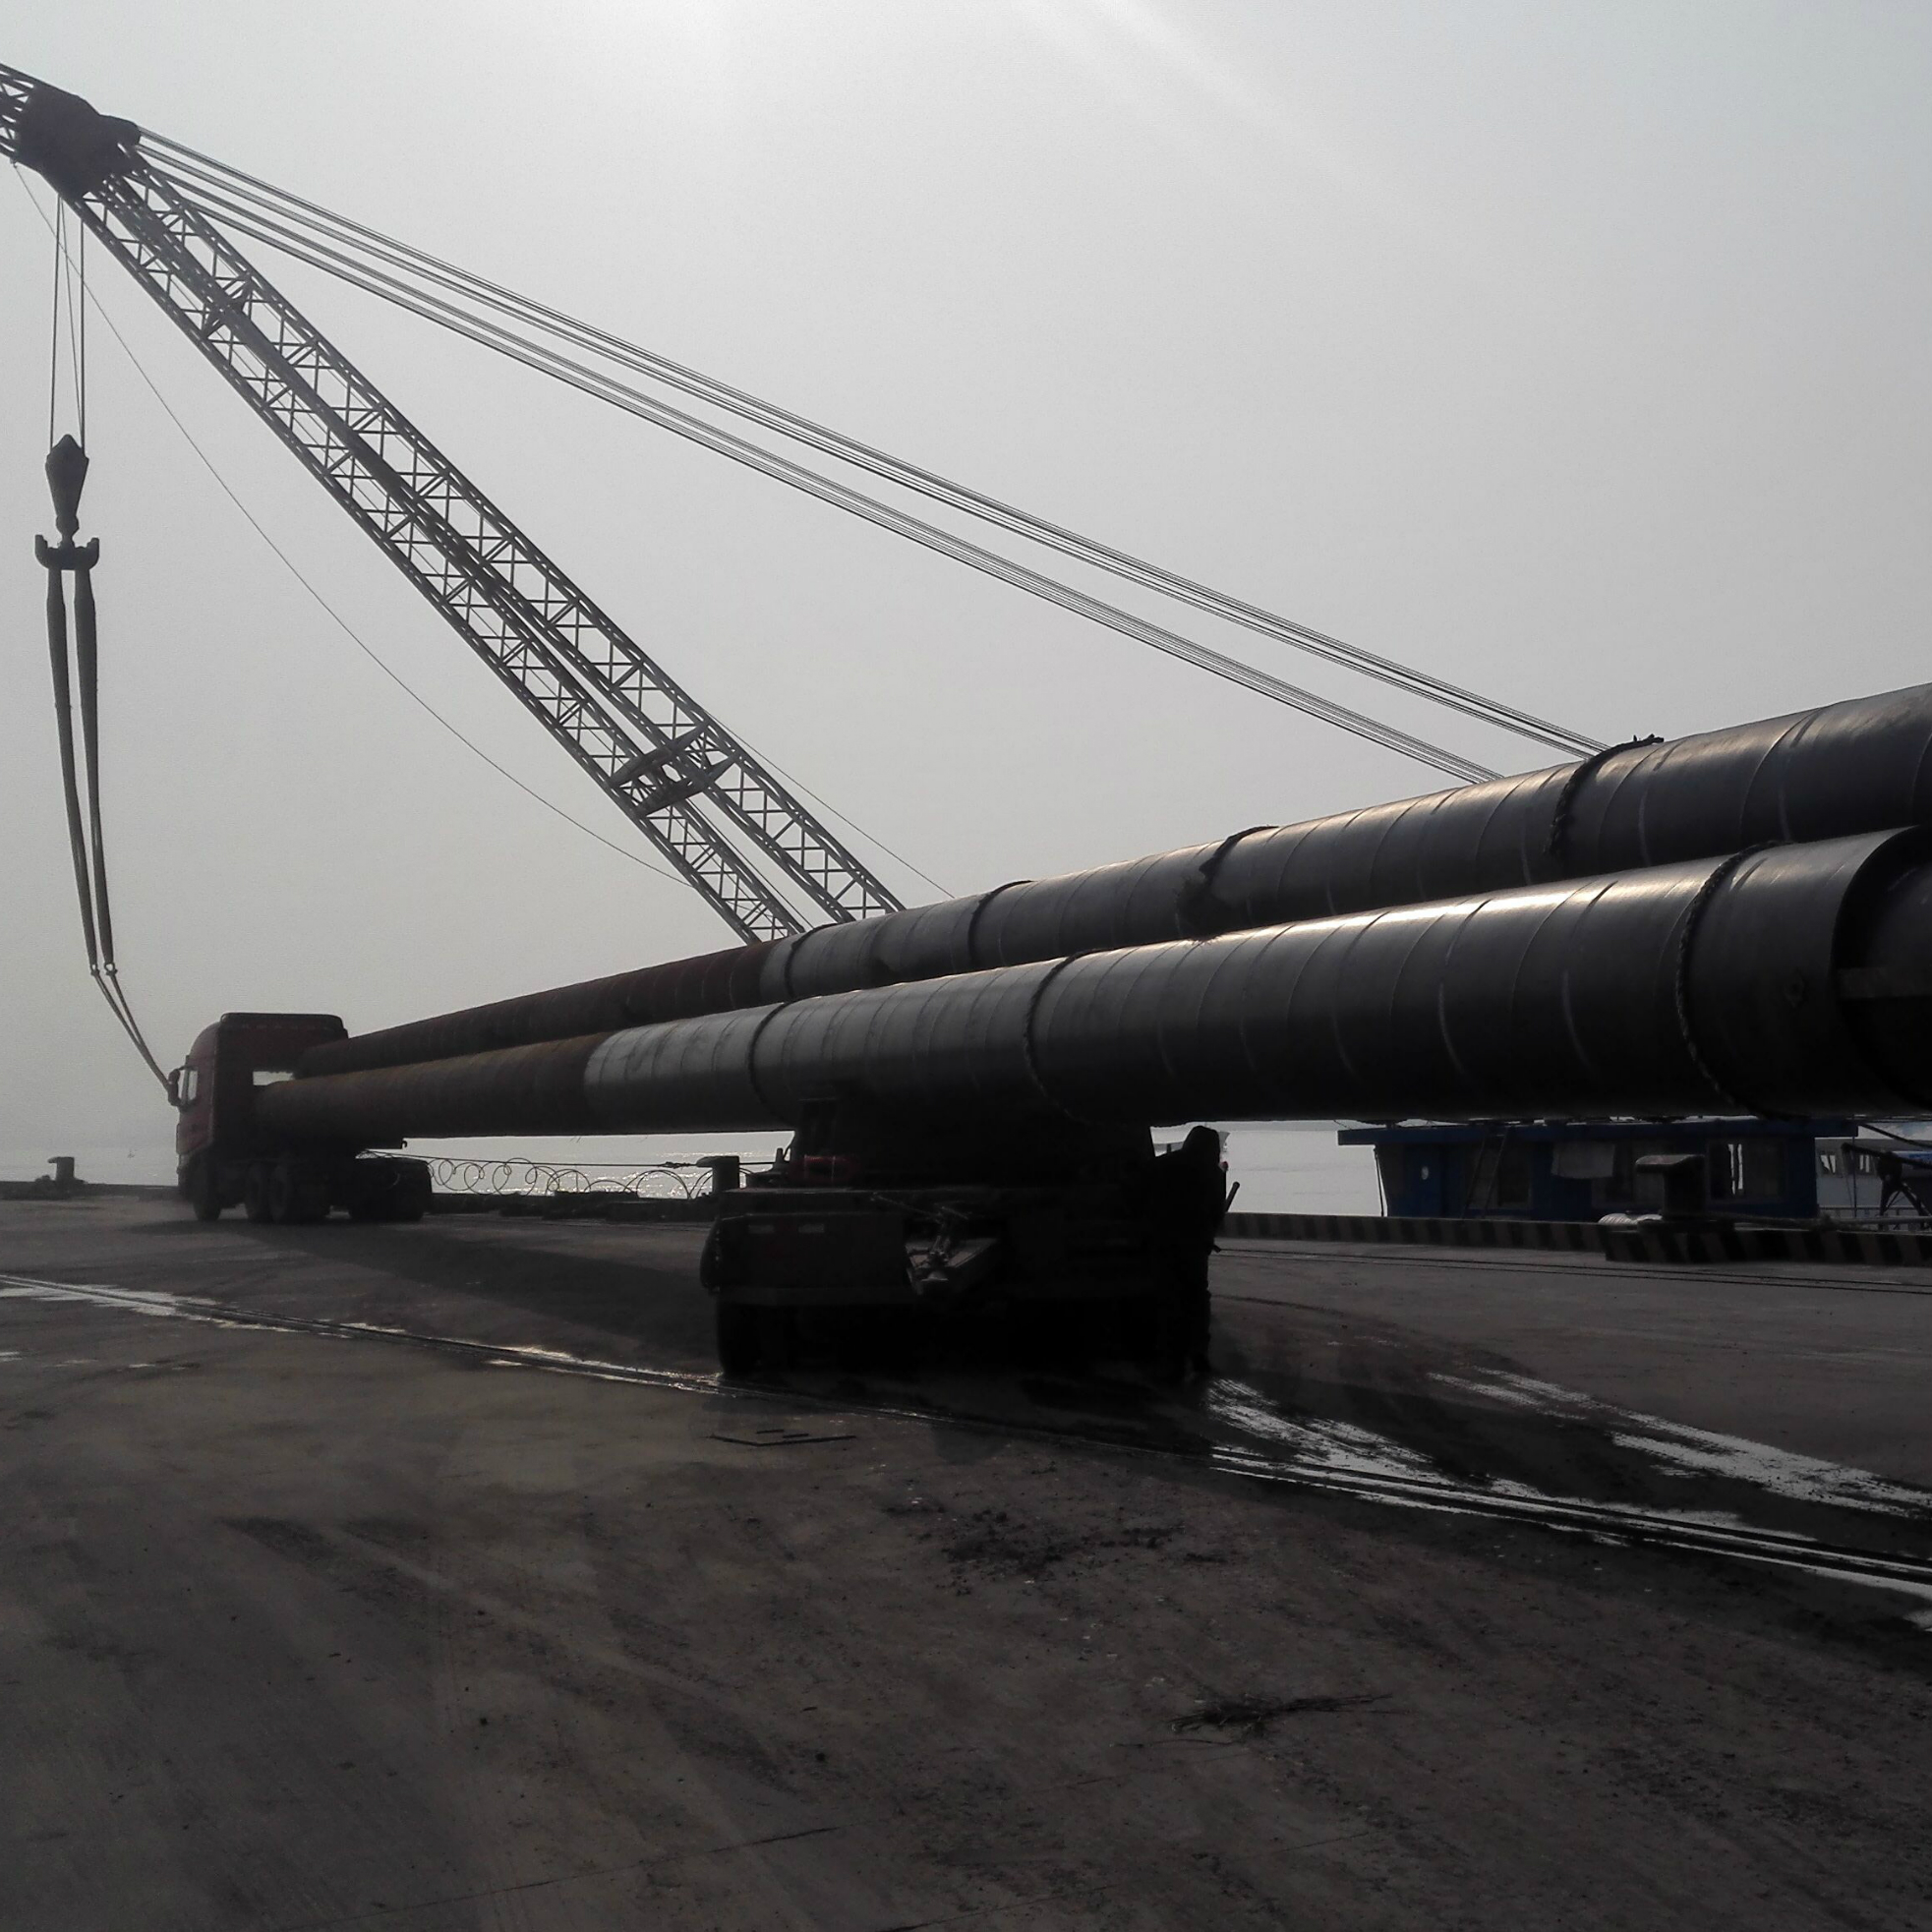 SSAW Steel Pipe Piles